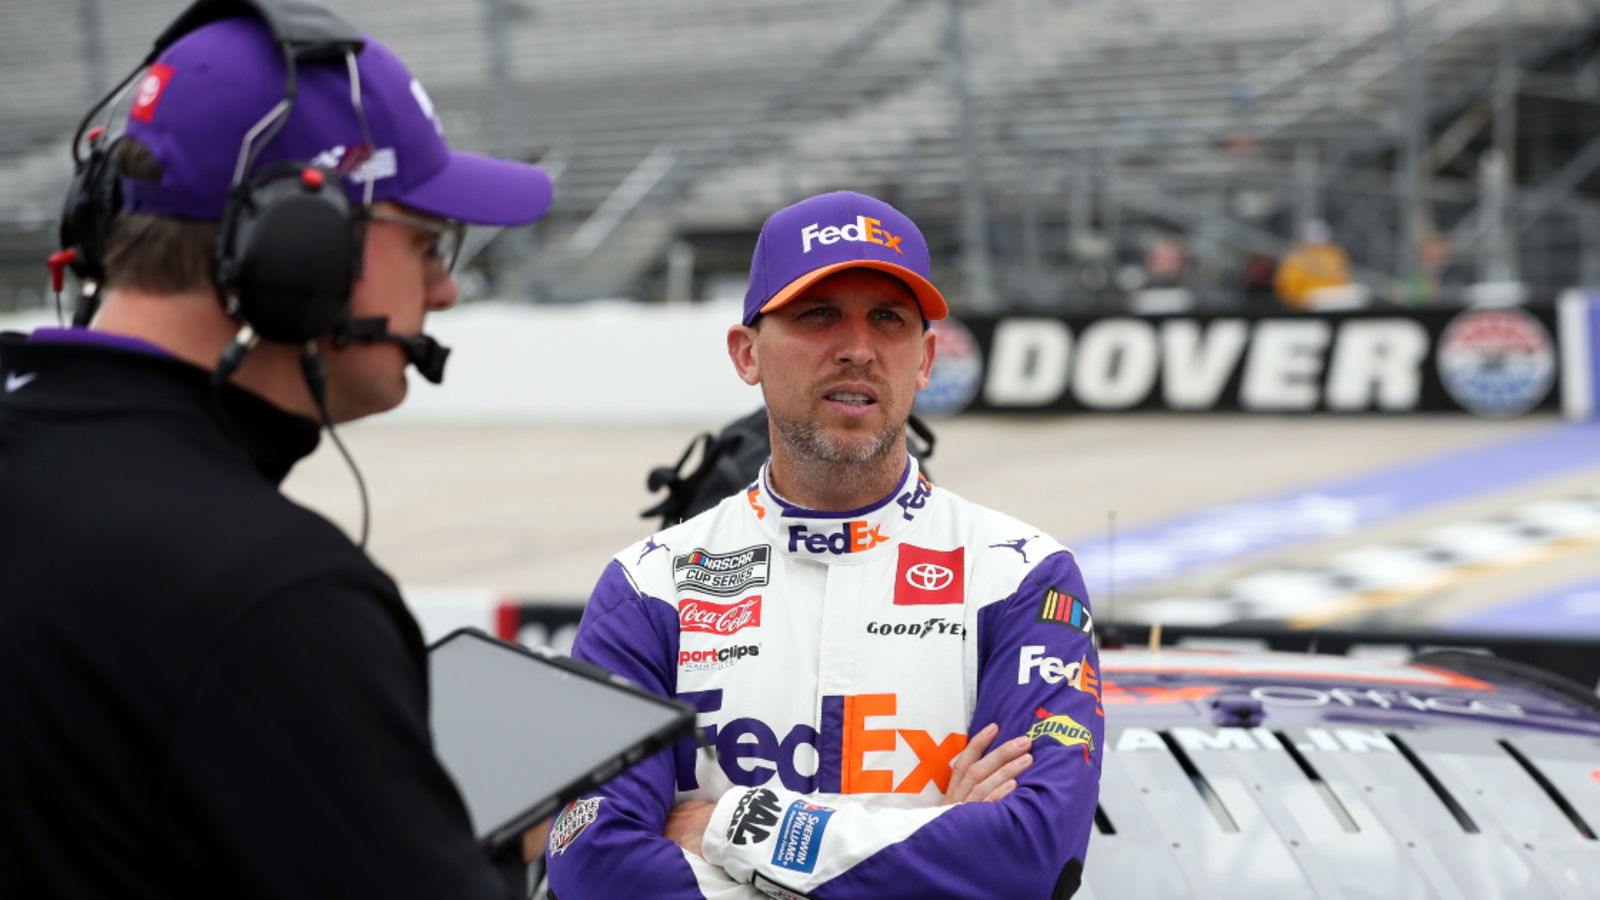 Crew chief Chris Gabehart explains what happened with Denny Hamlin at Homestead